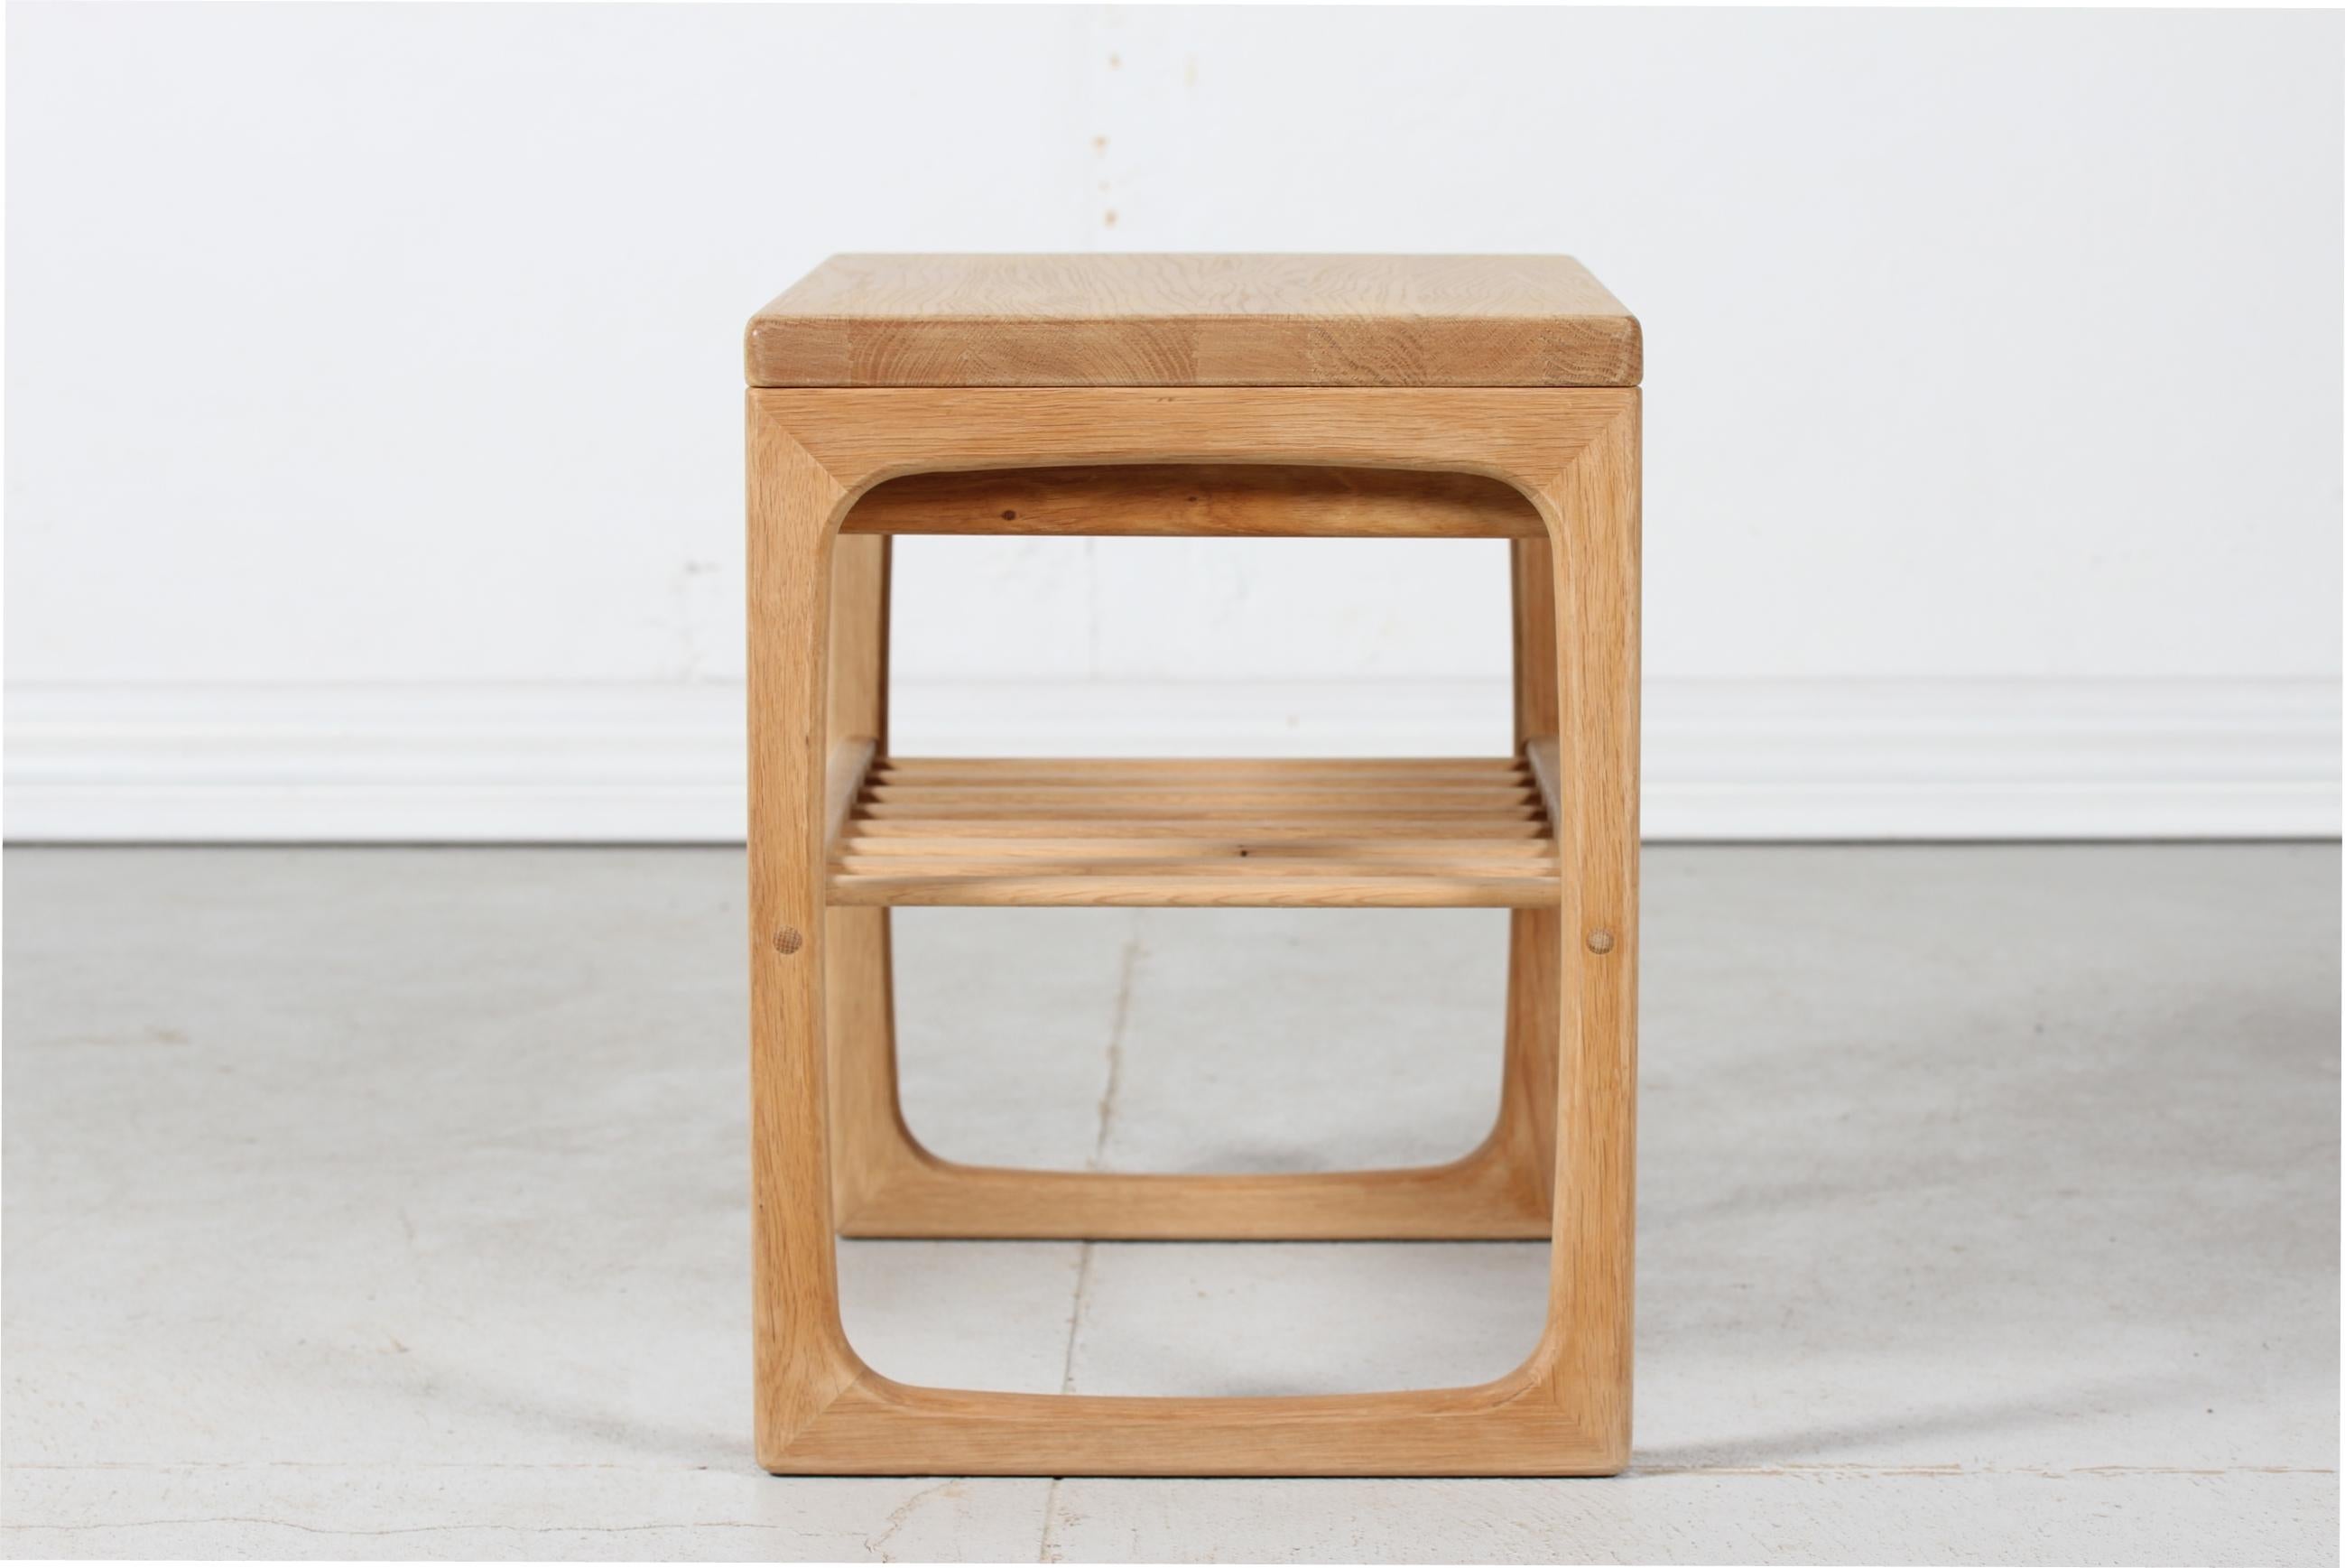 Danish Modern Side Table with Drawer Made of Oak by Danish Cabinetmaker, 1980s For Sale 5